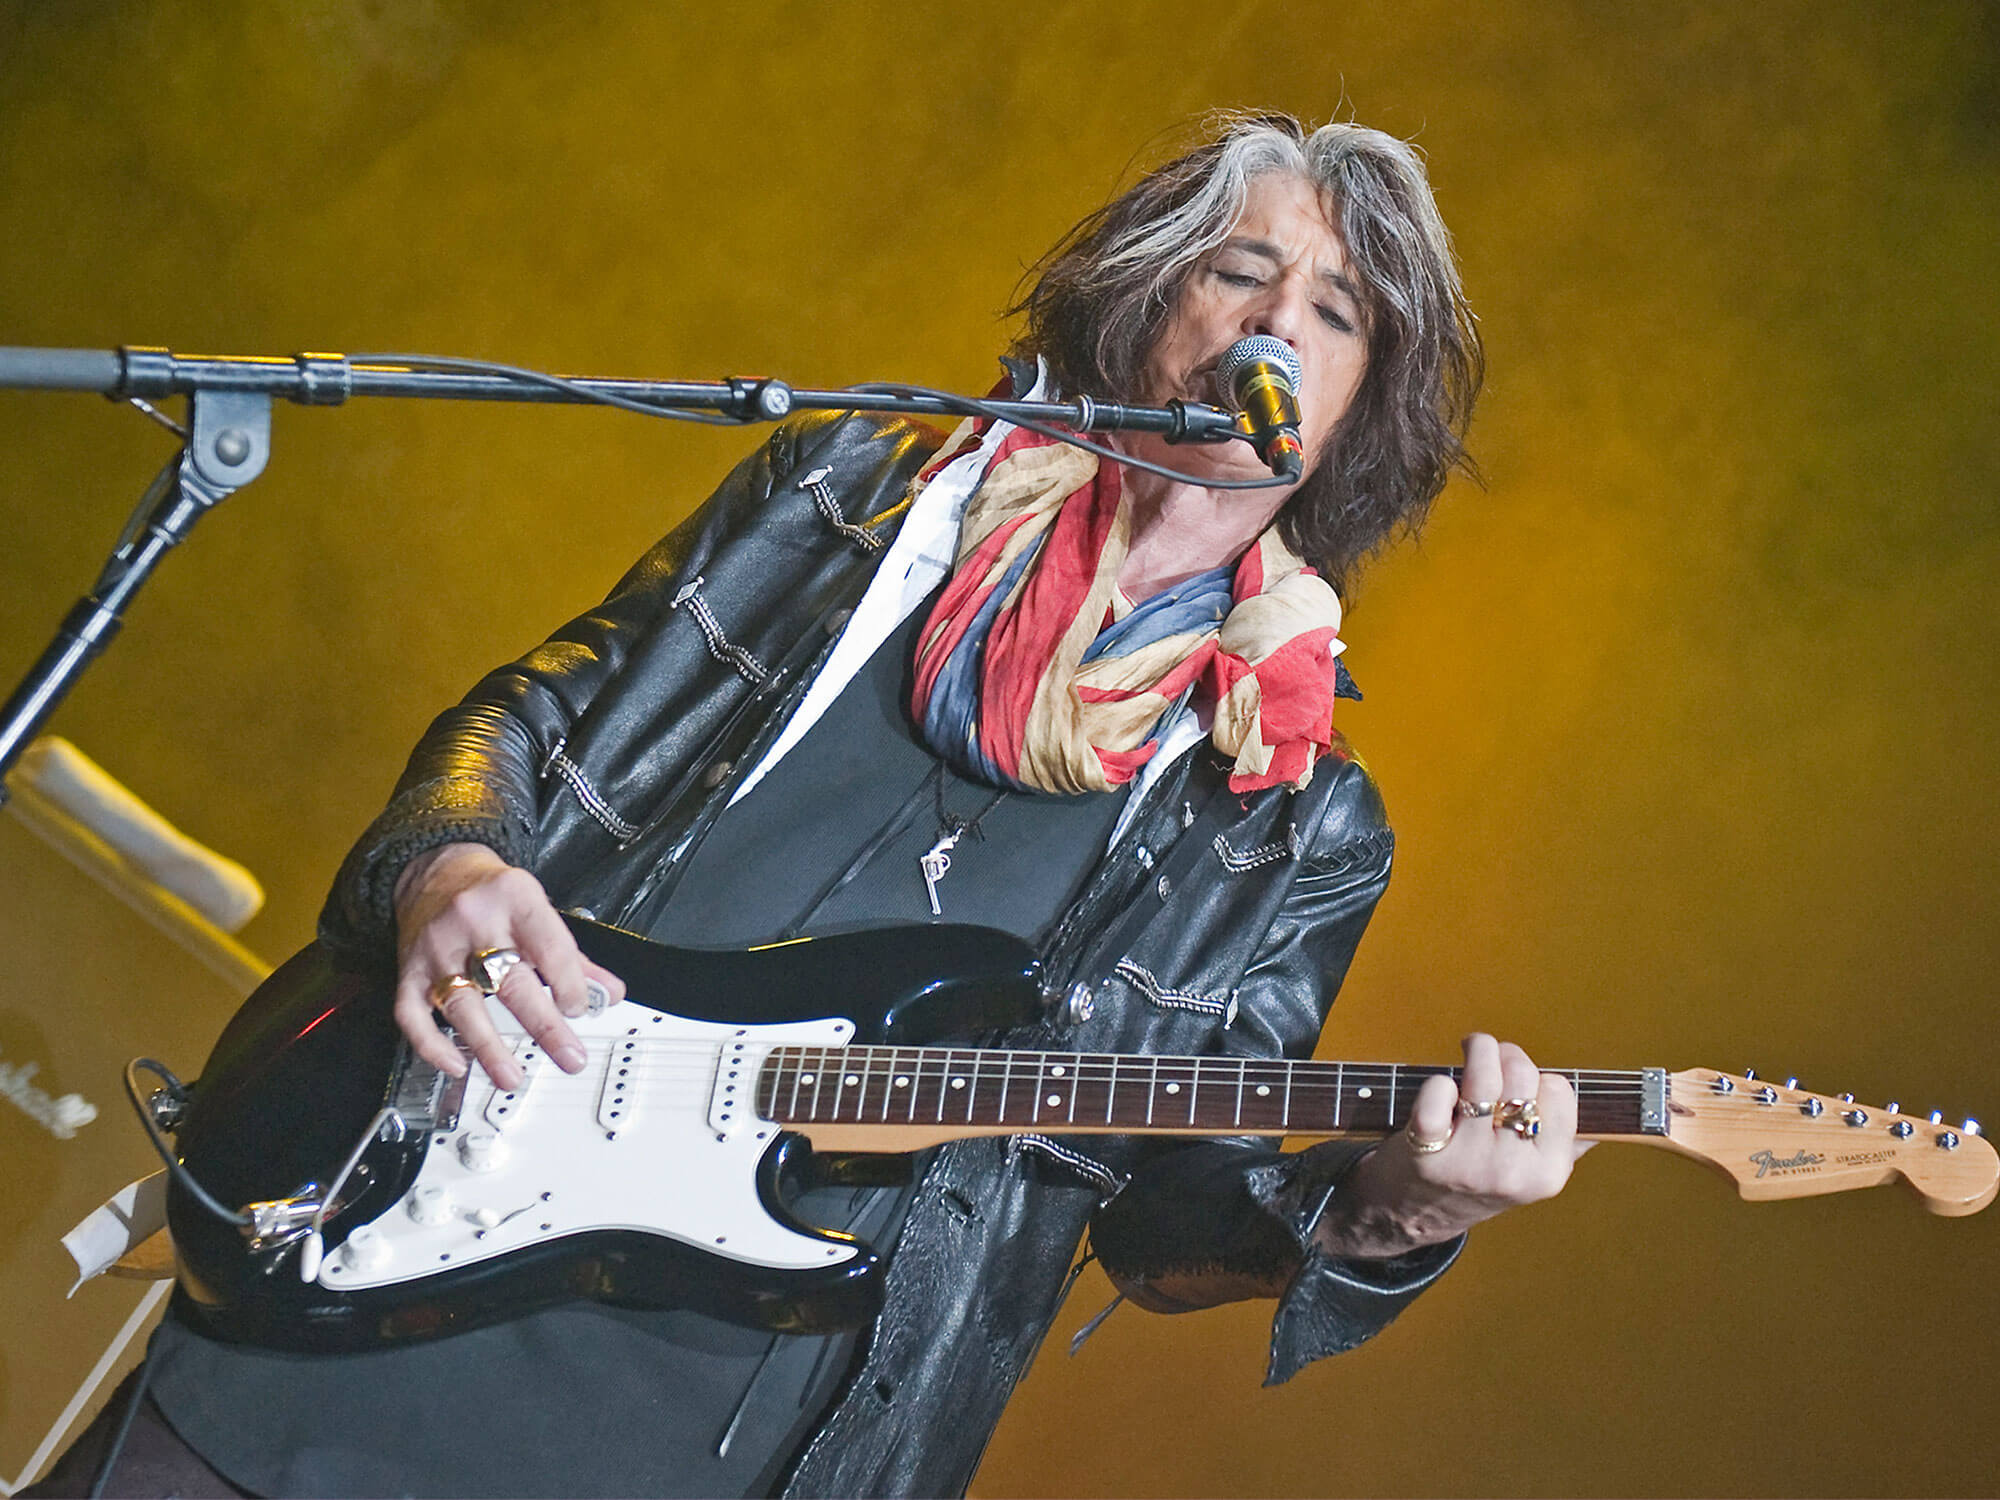 Joe Perry performing live with a Fender Stratocaster